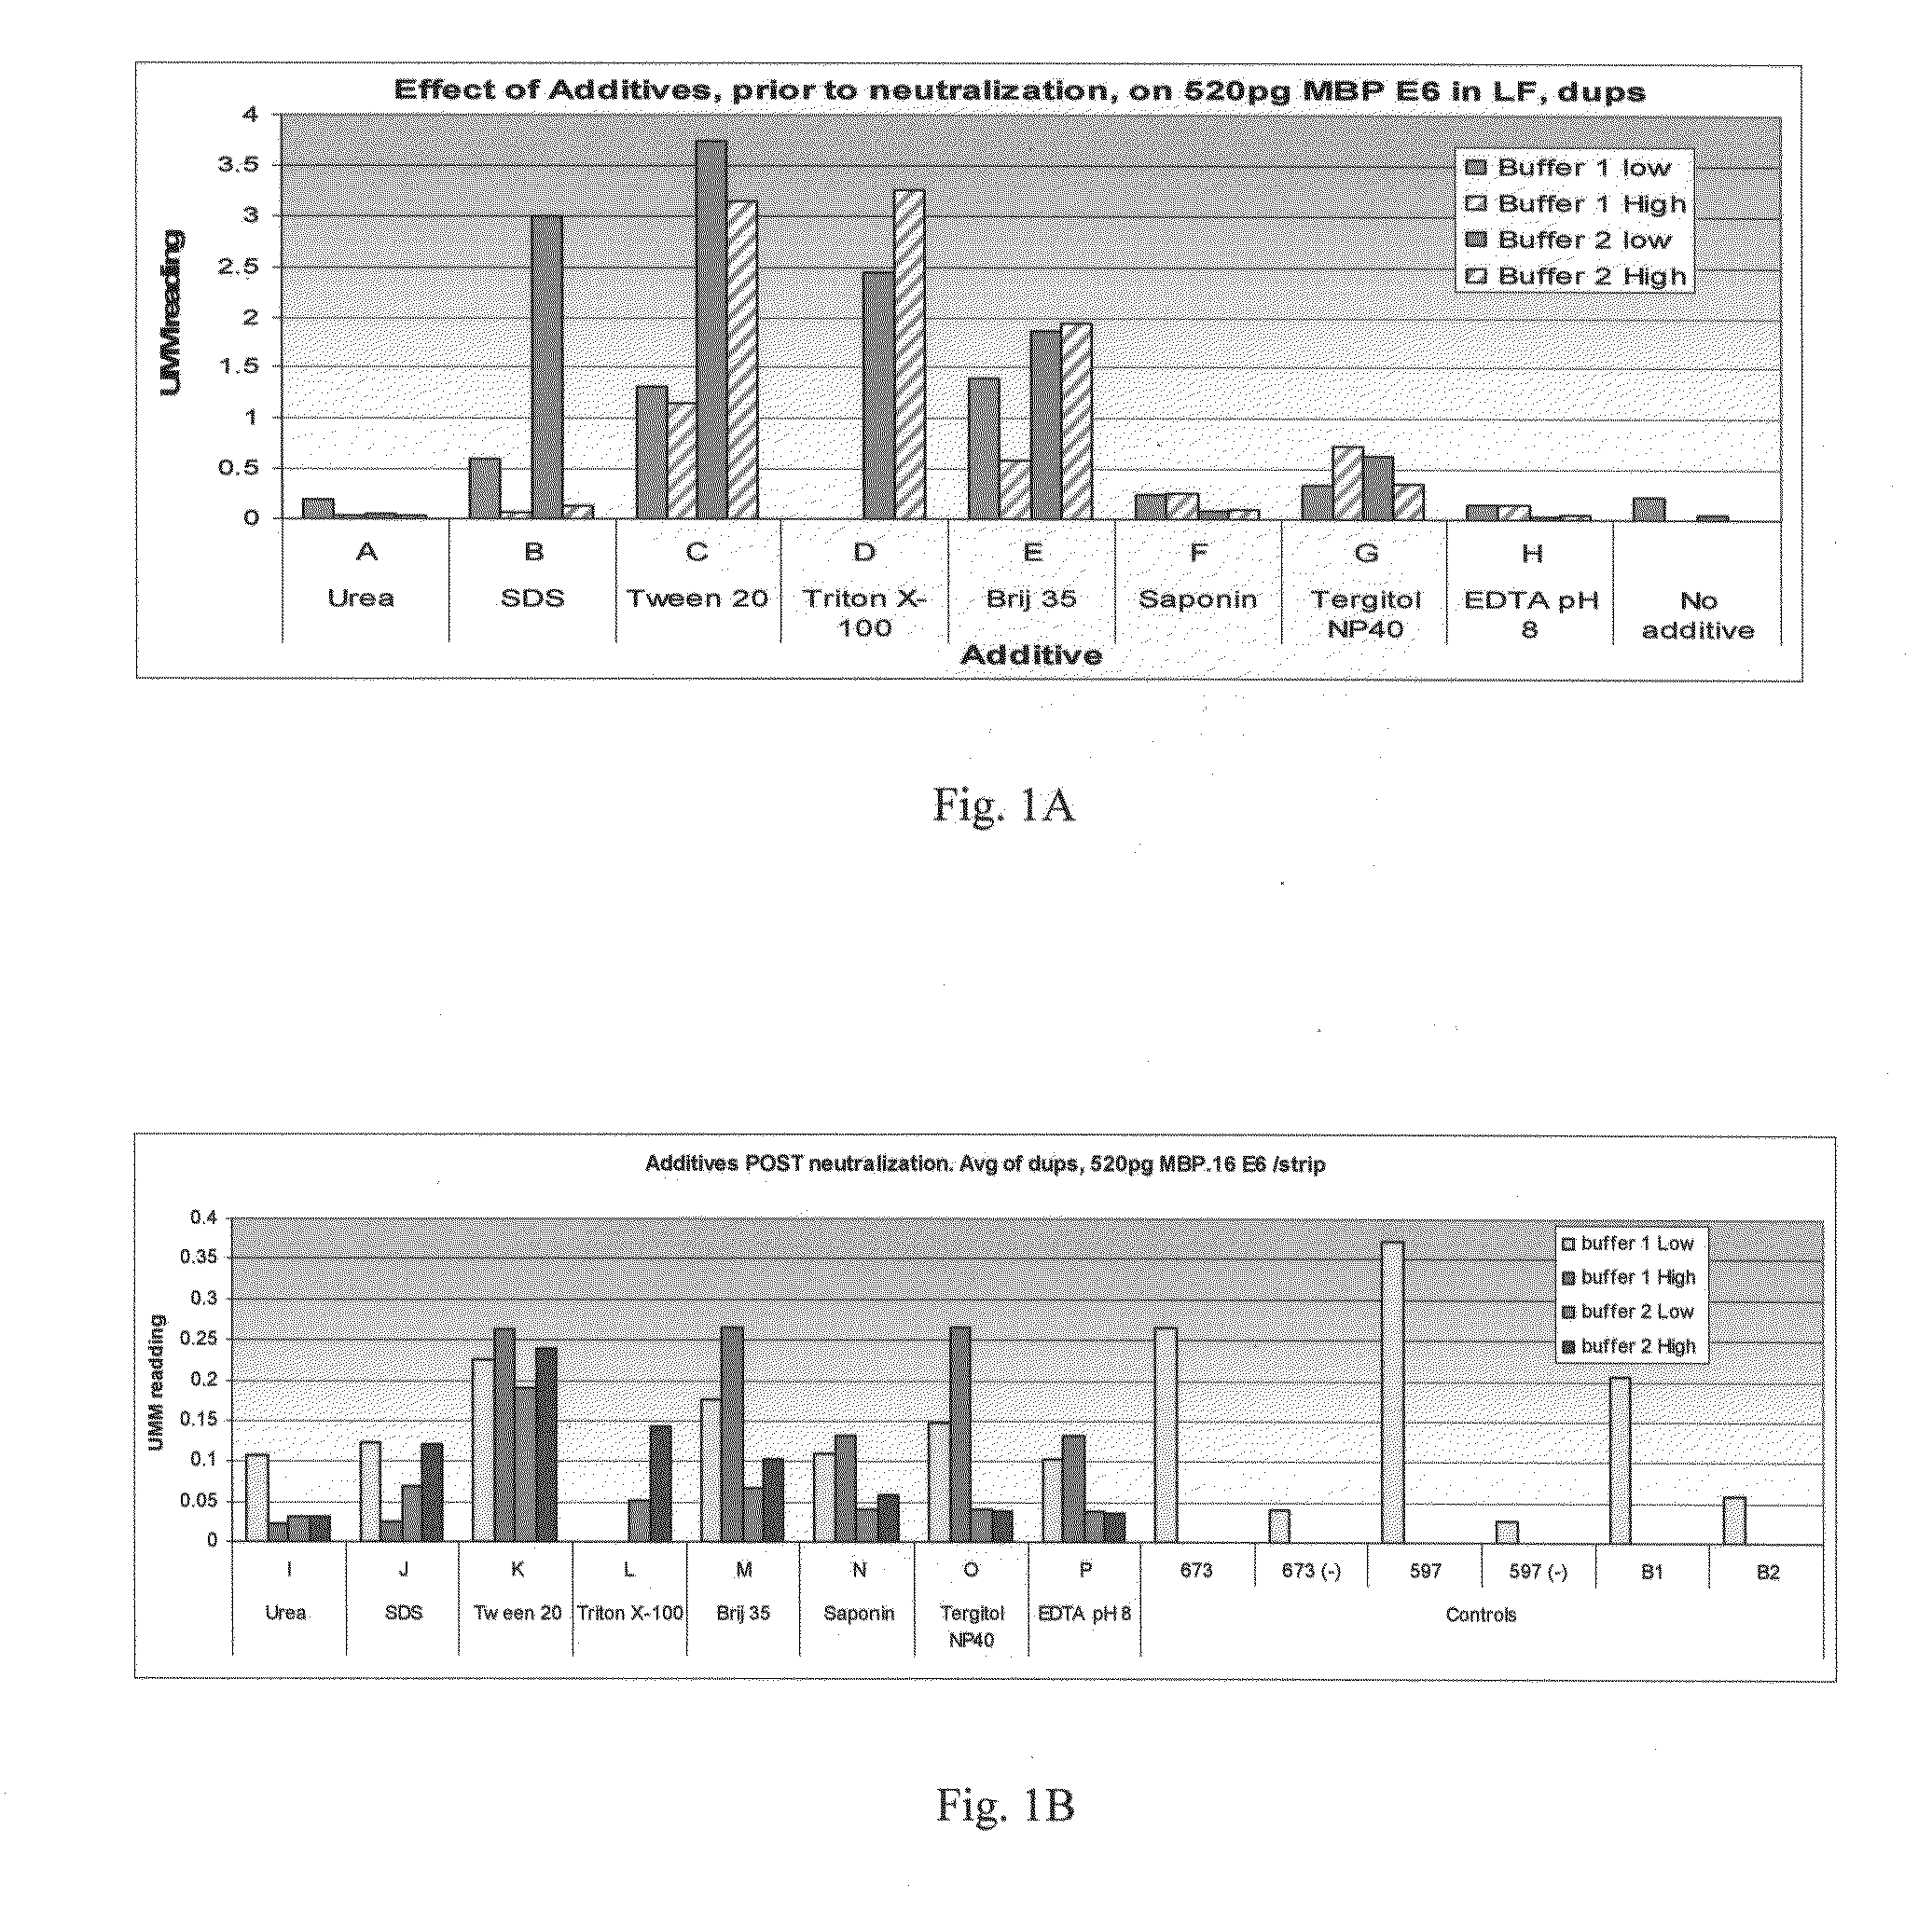 Method of efficient extraction of protein from cells